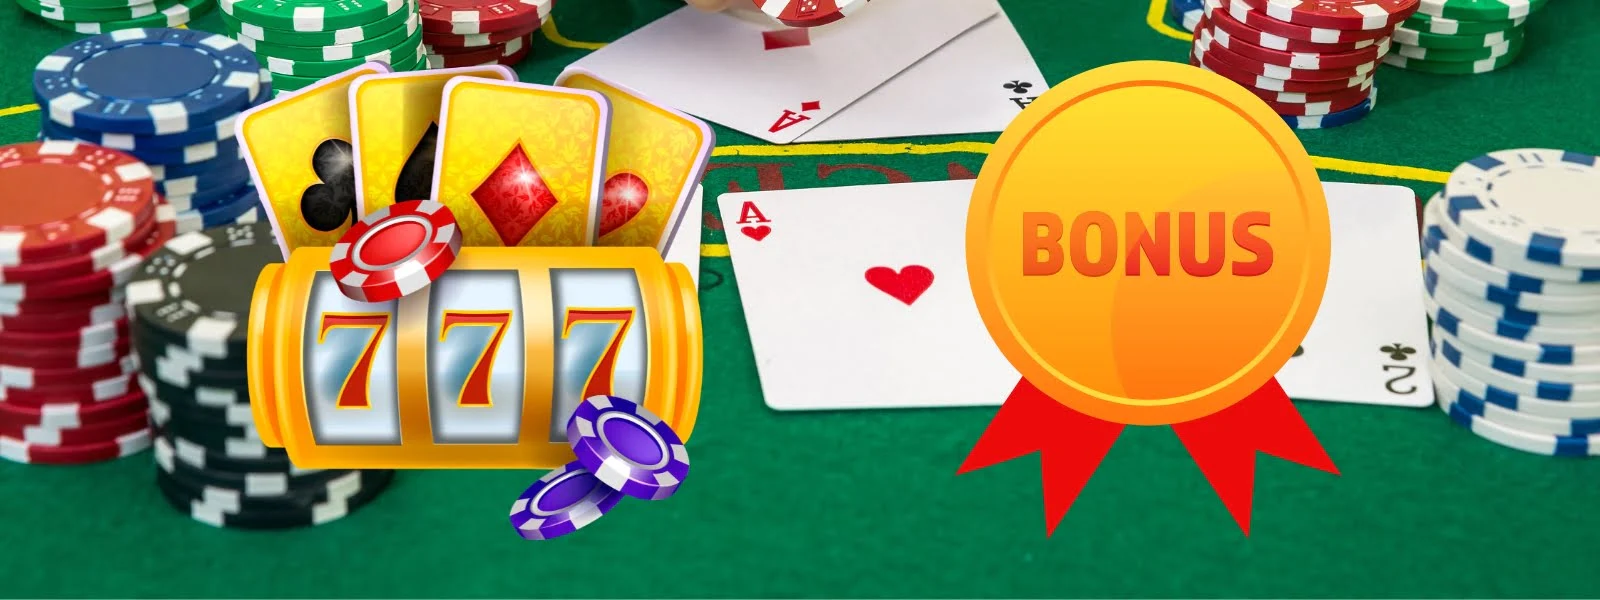 Live Quantum Blackjack Plus offers players the opportunity to utilise two common types of bonuses. 